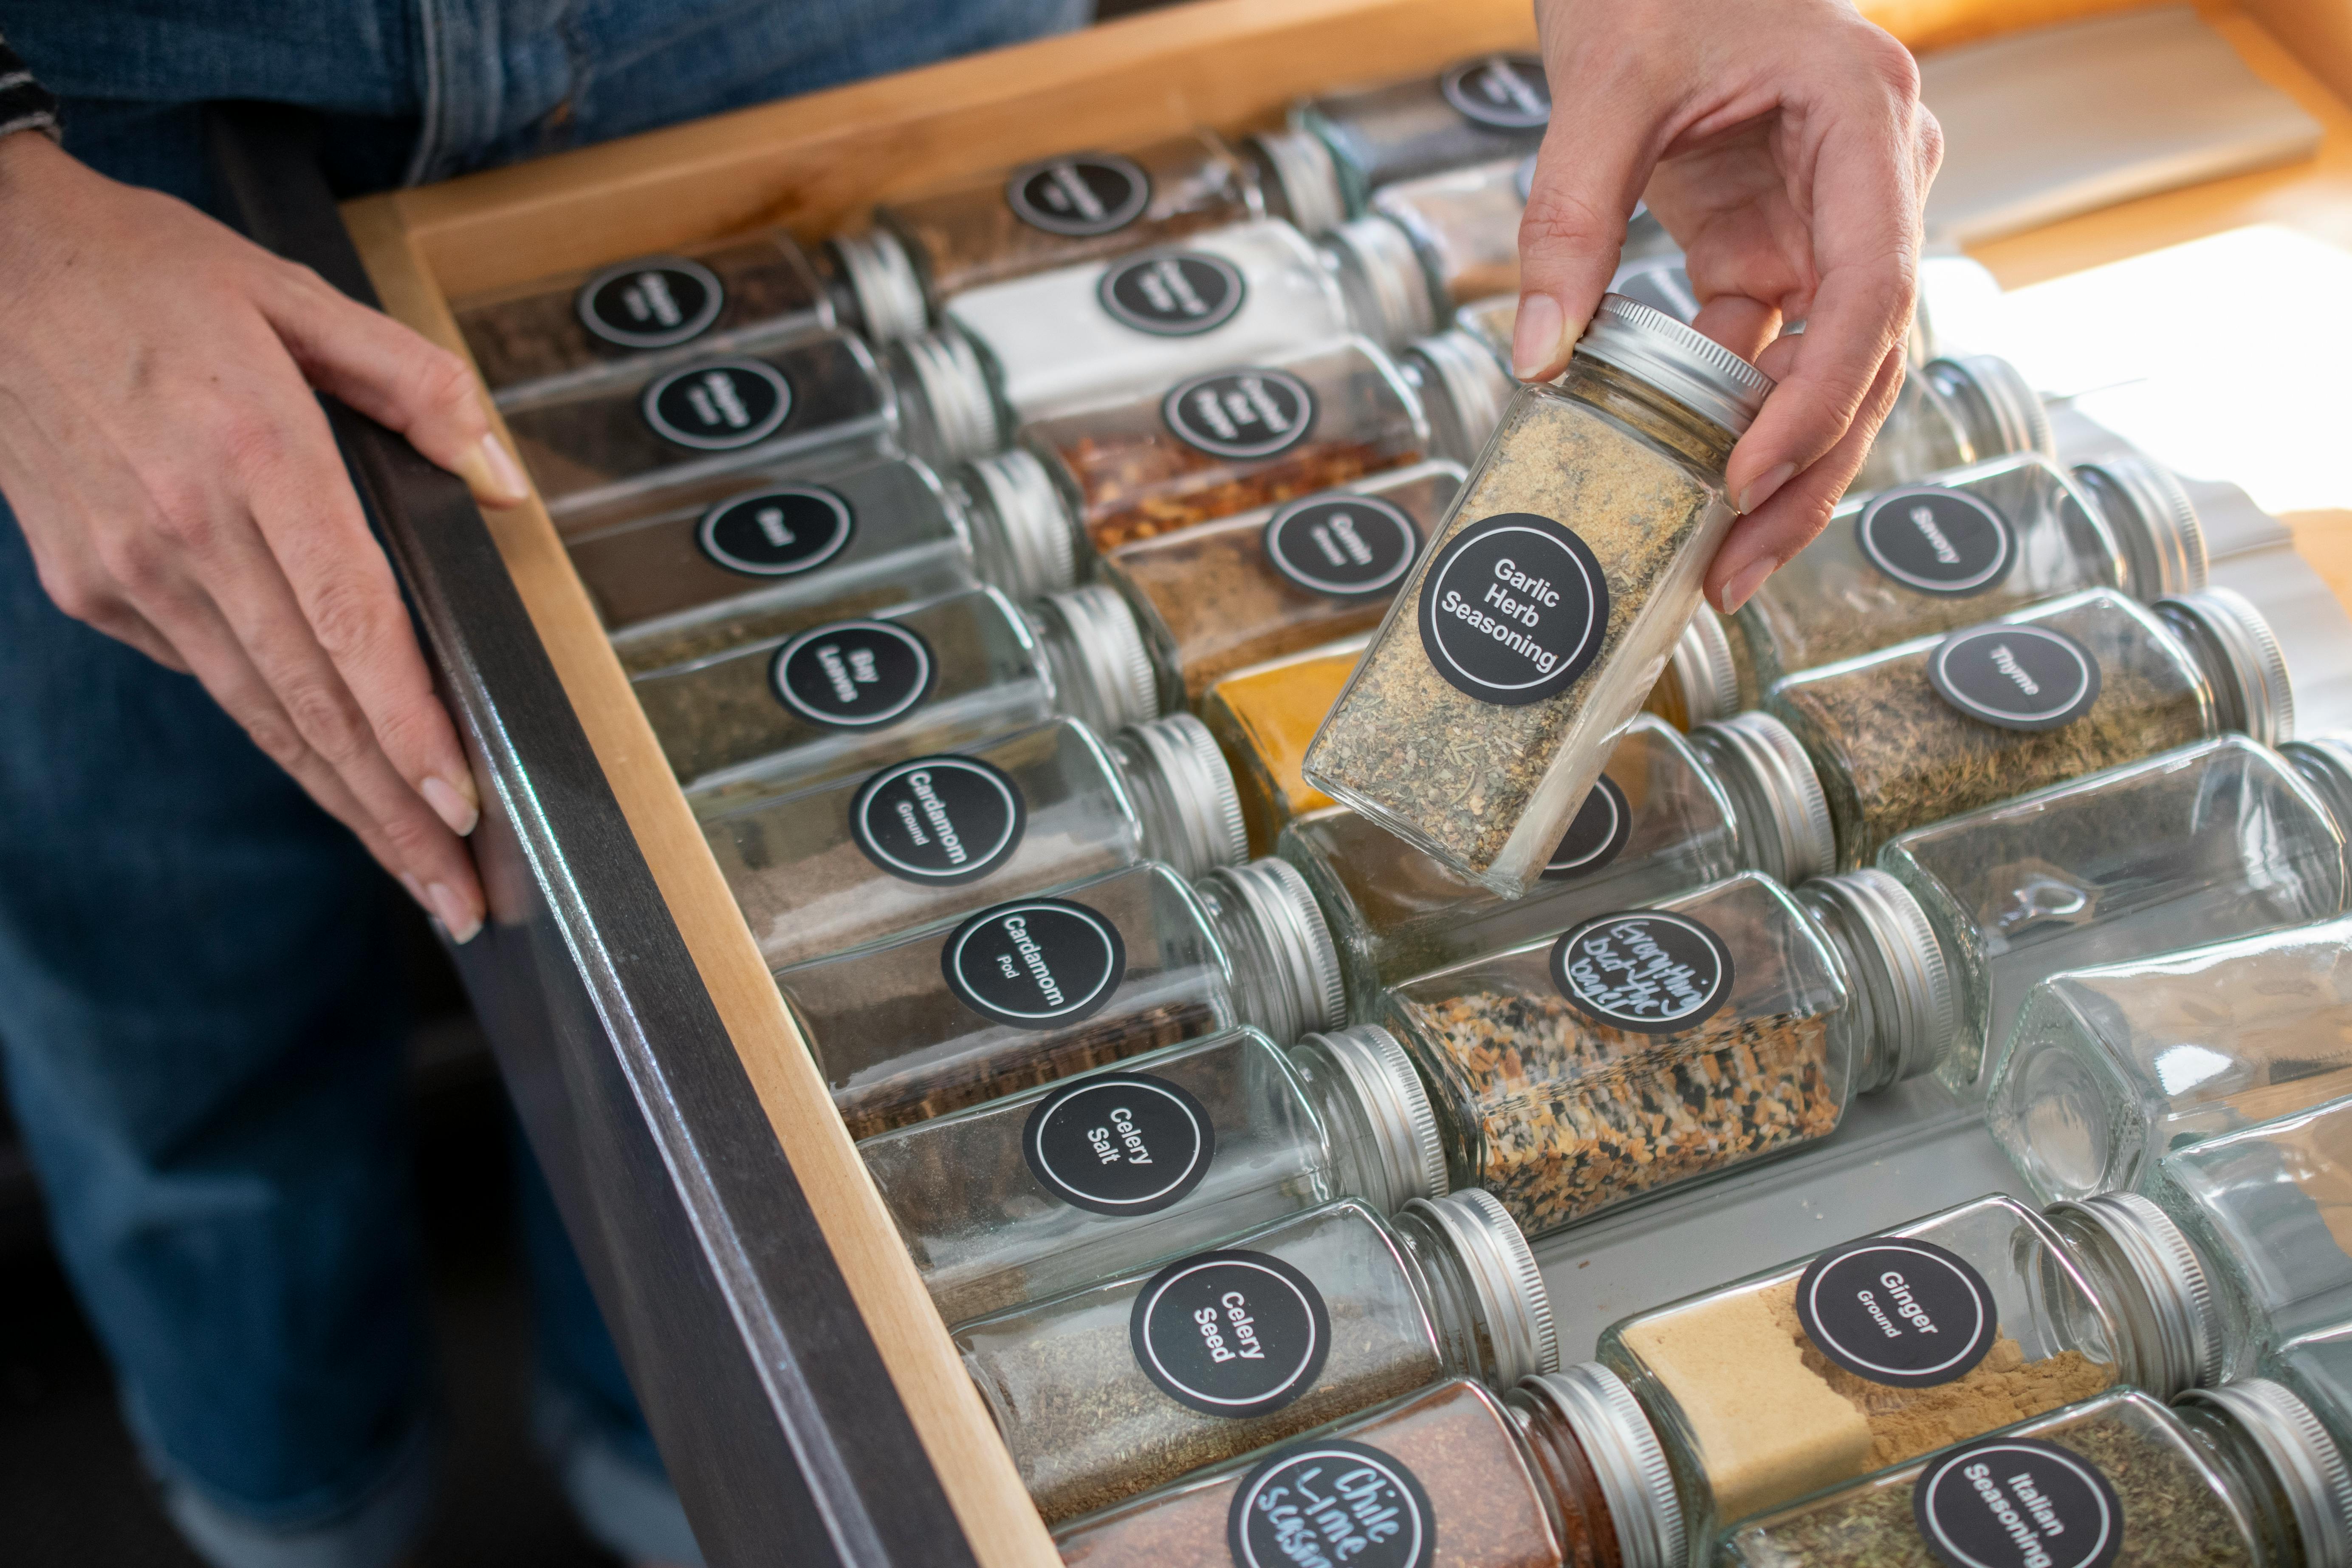 A drawer filled with spice jars